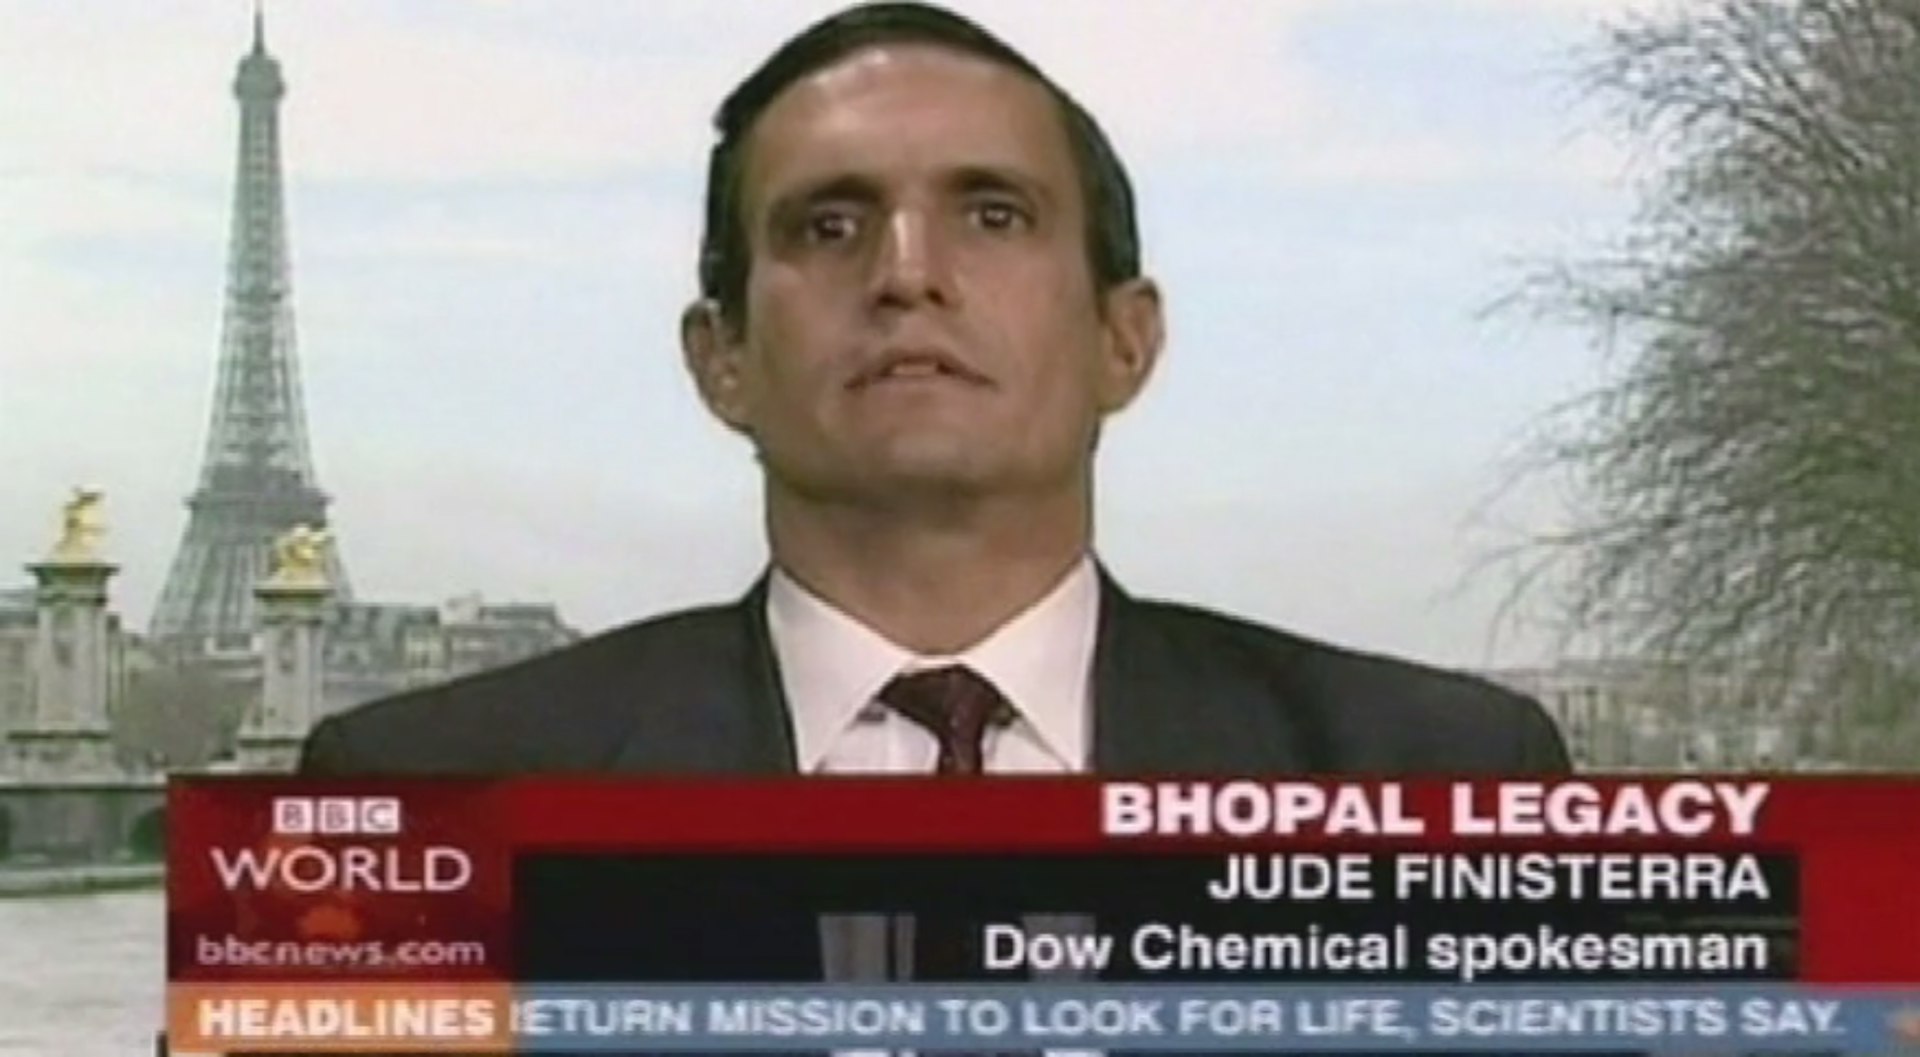 Jacques Servin poses as a DOW Chemical spokesman and accepts responsibility for the Bhopal disaster on BBC World News. The broadcast reached 400m people.